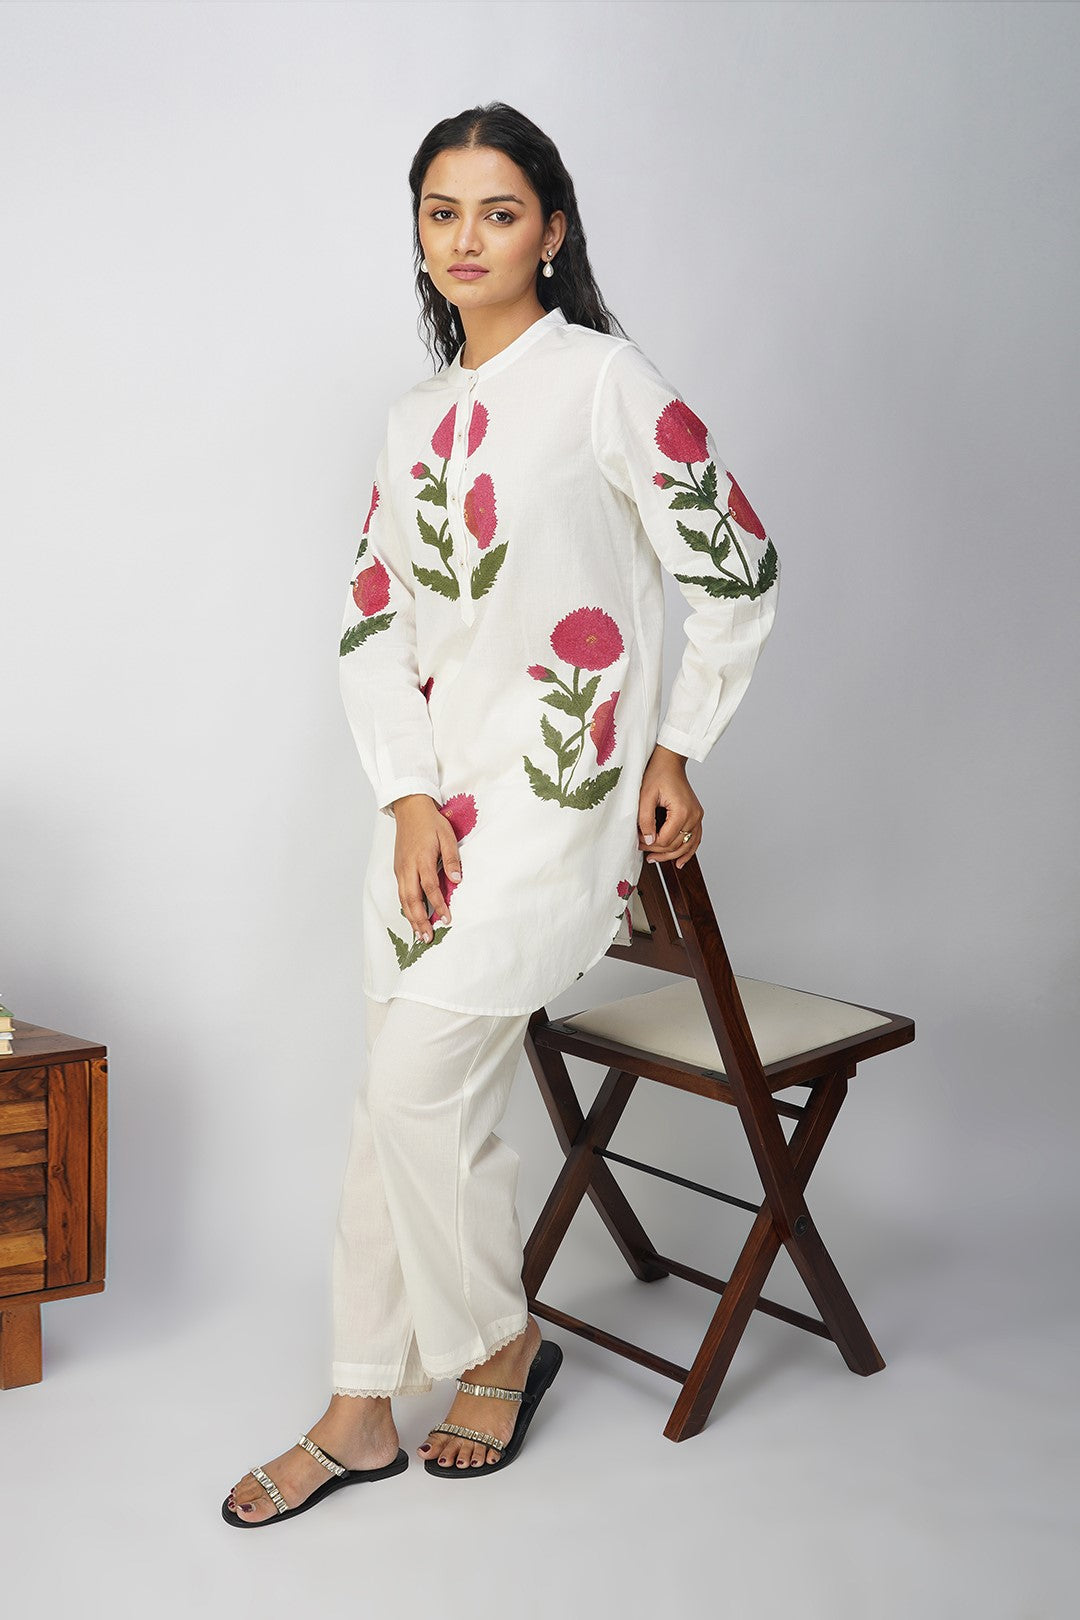 White Tunic with Red floral print and Lace Pants